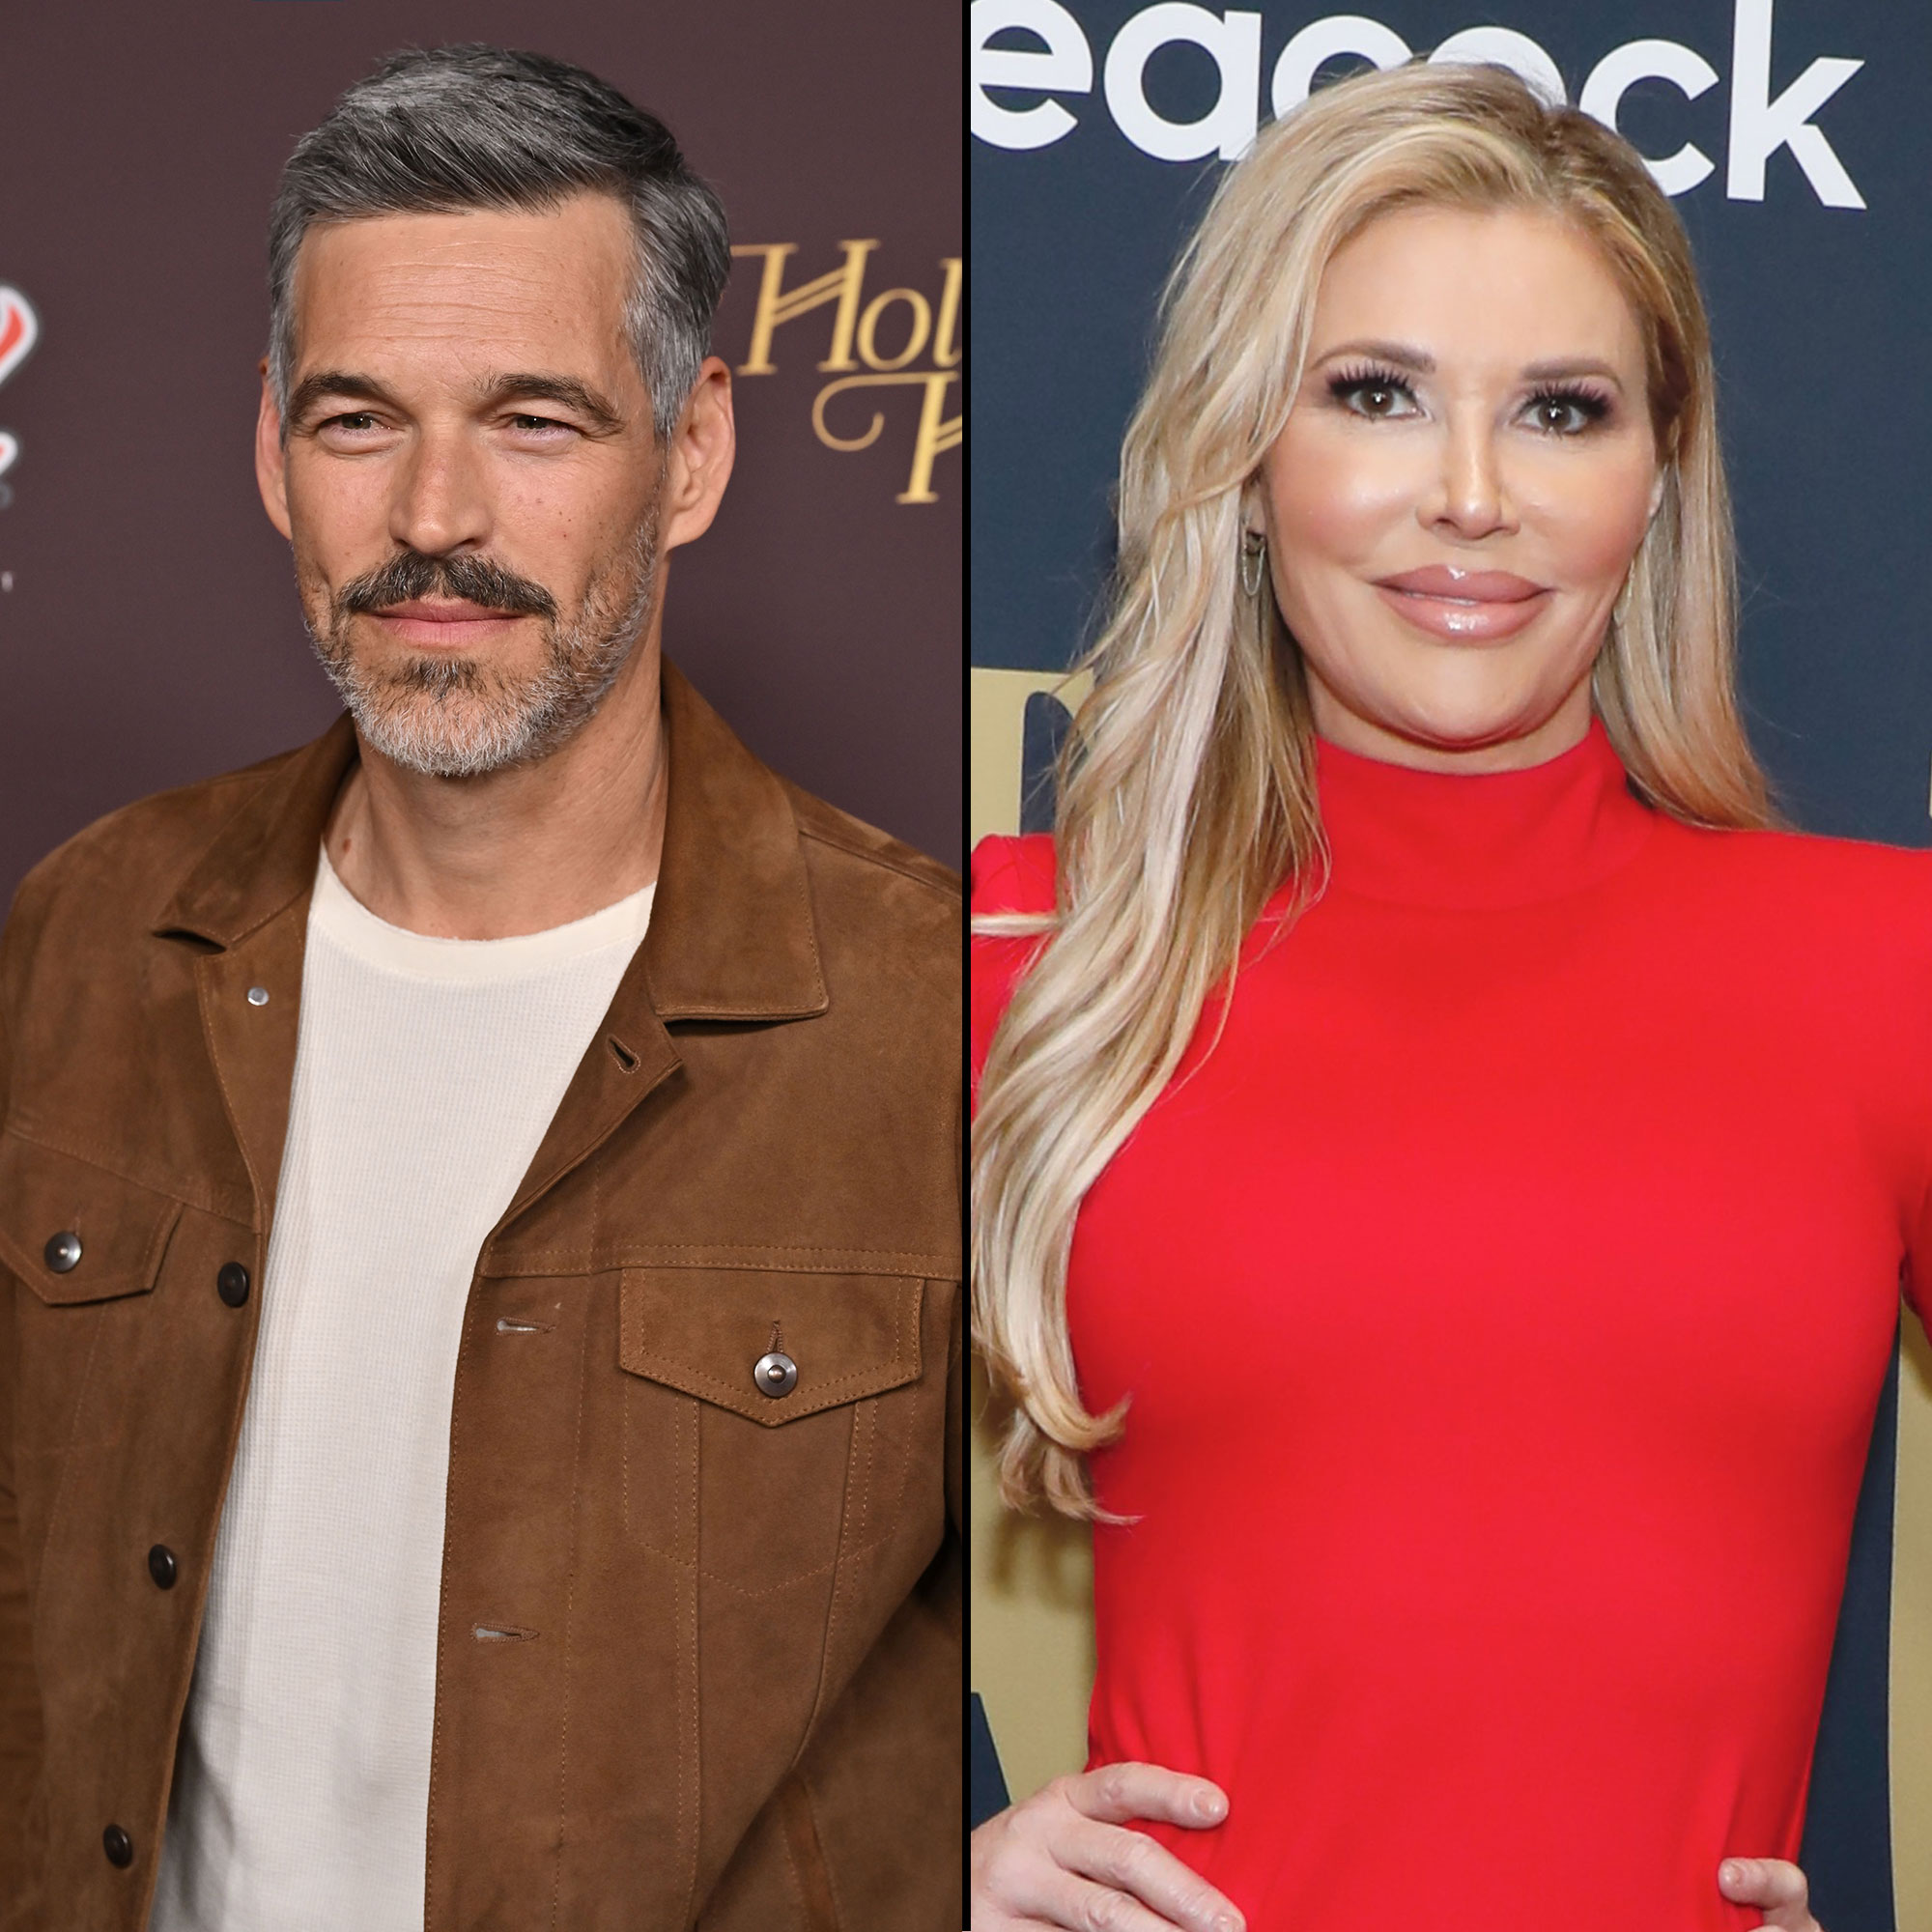 Eddie Cibrian Denies Cheating on Ex-Wife Brandi With Piper Perabo picture